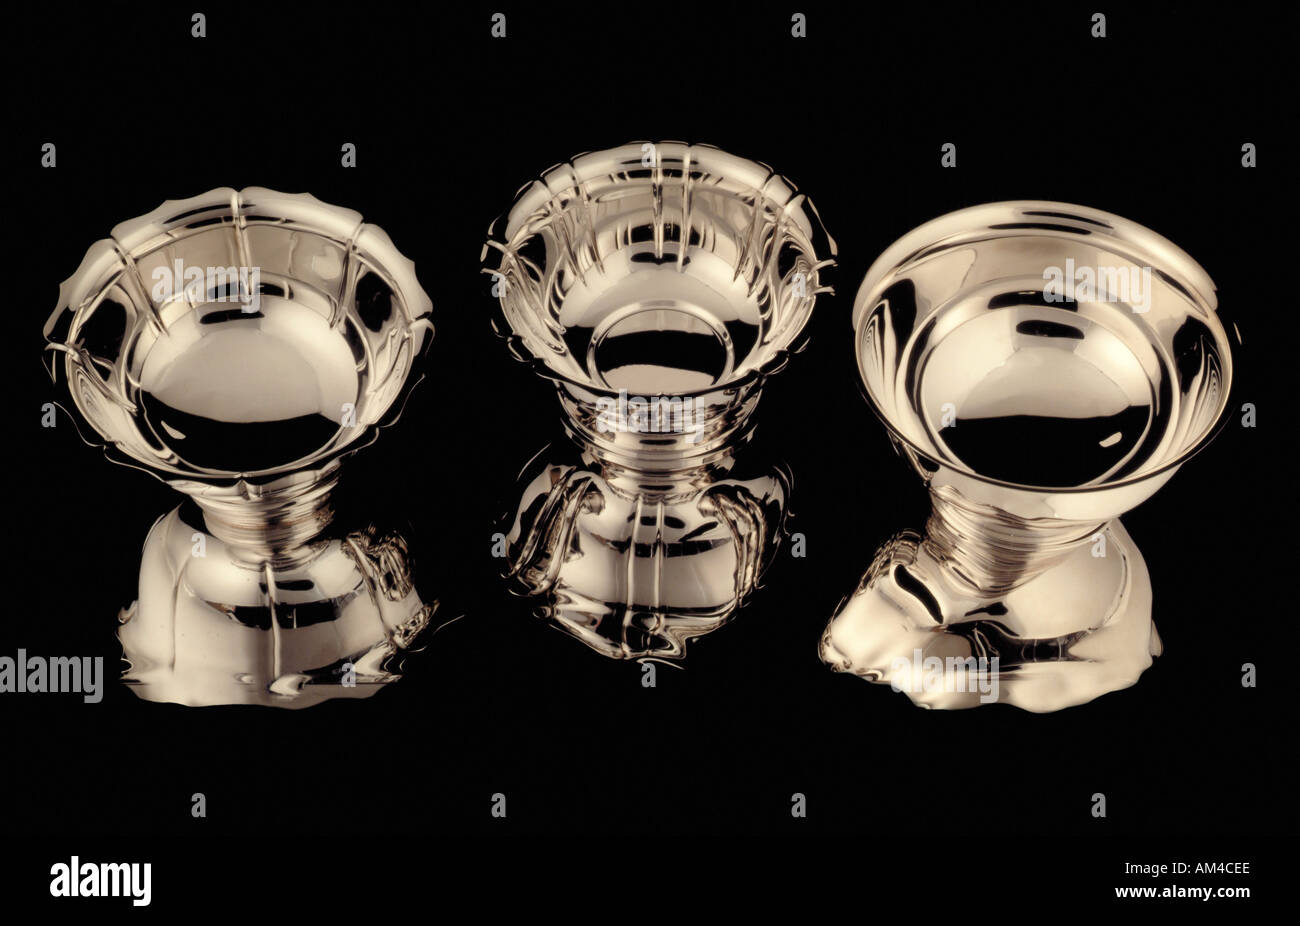 silver award bowls on a black background Stock Photo